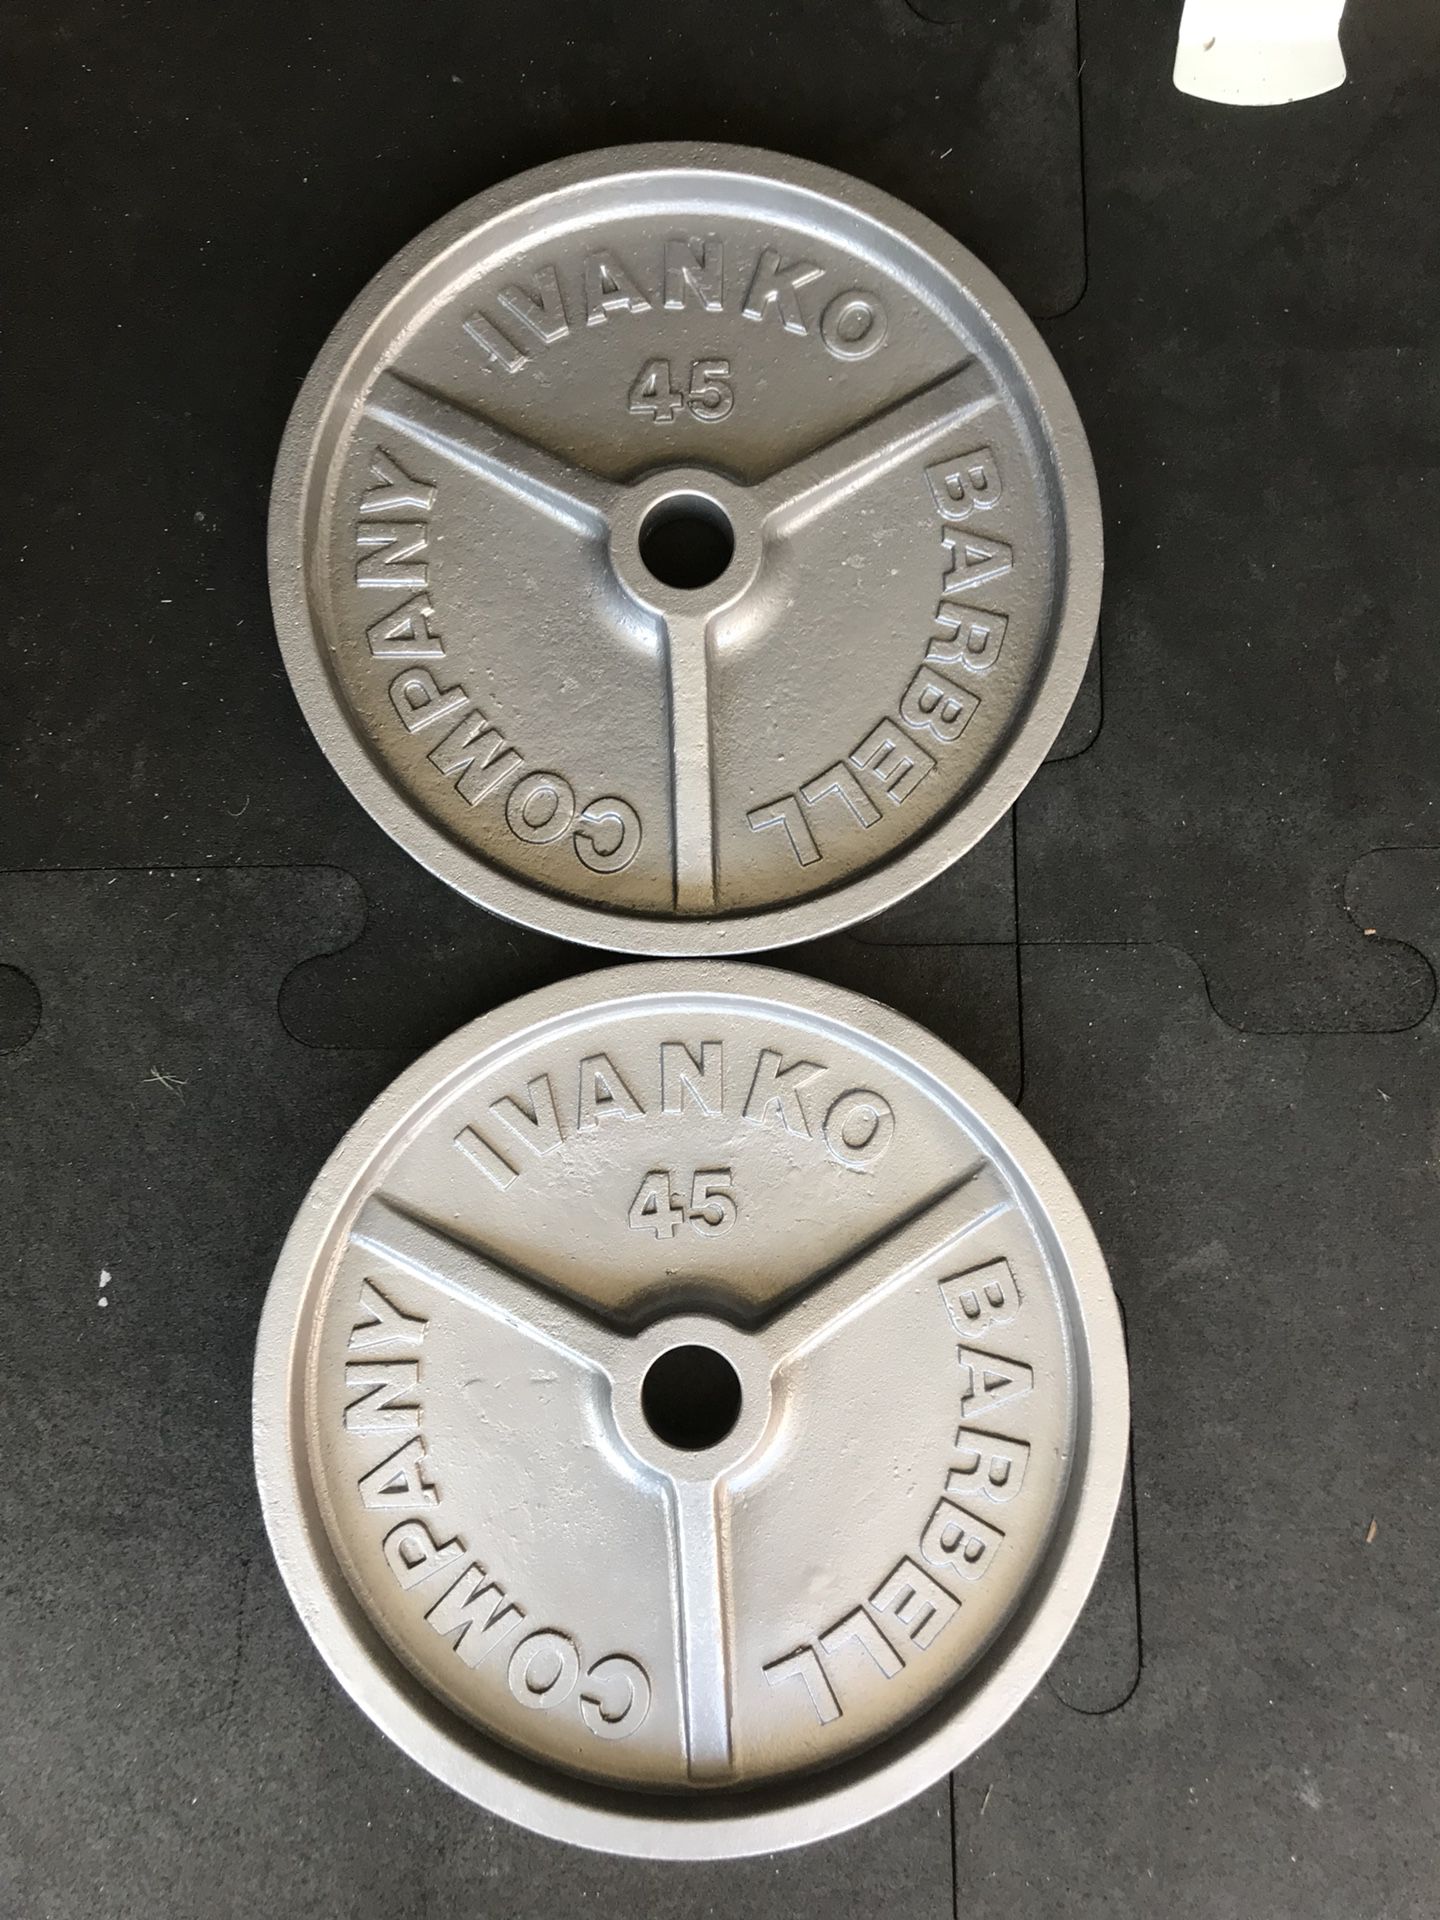 Ivanko Olympic weights (2x45s) for $80 Firm!!!